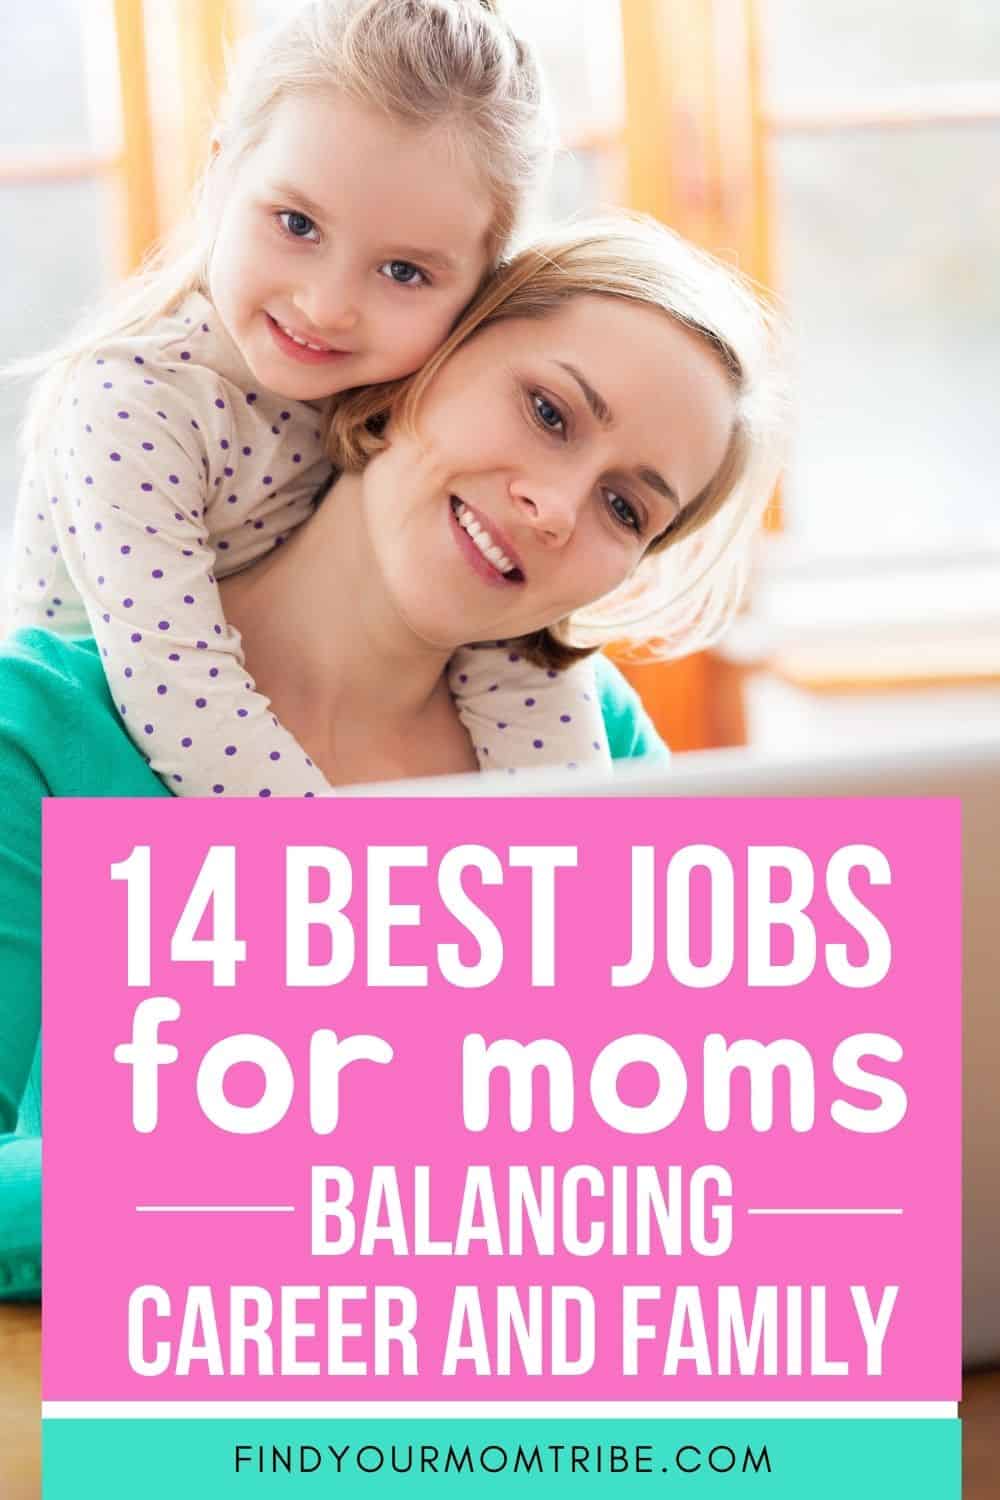 14 Best Jobs For Moms Of 2021: Balancing Career And Family